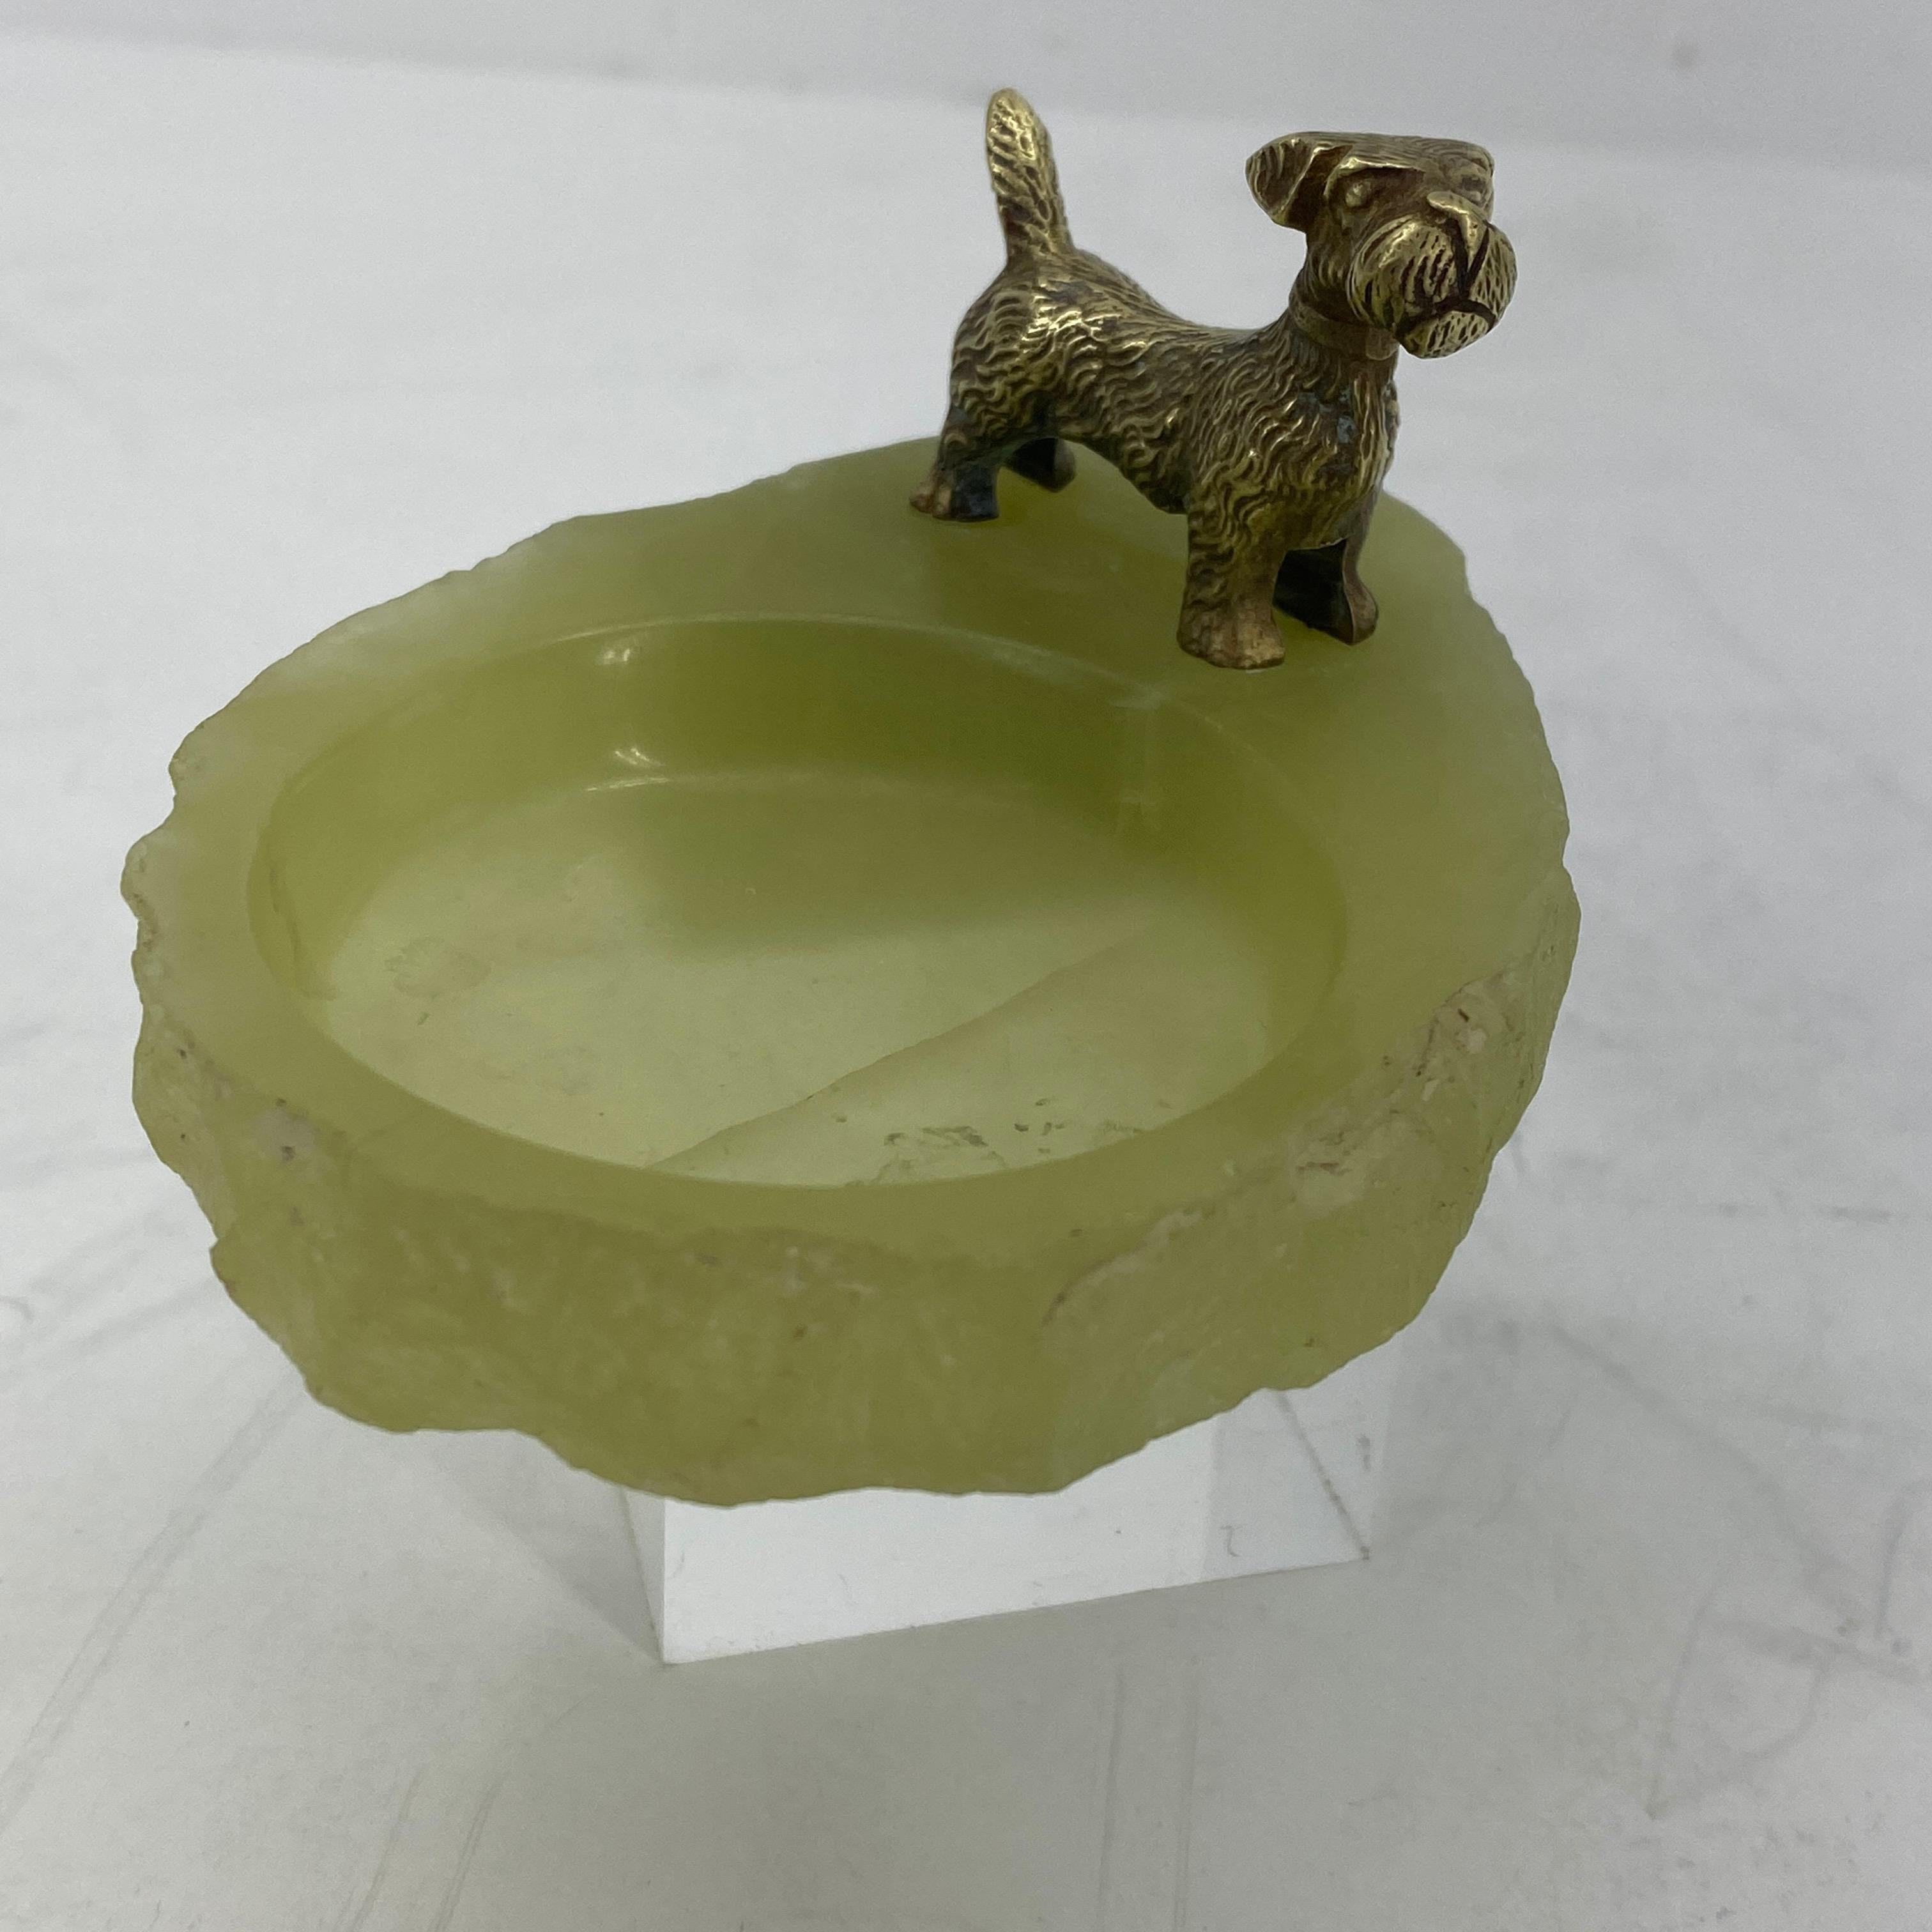 Pistachio Green Onyx and Bronze Terrier Ashtray or Jewelry Tray 10